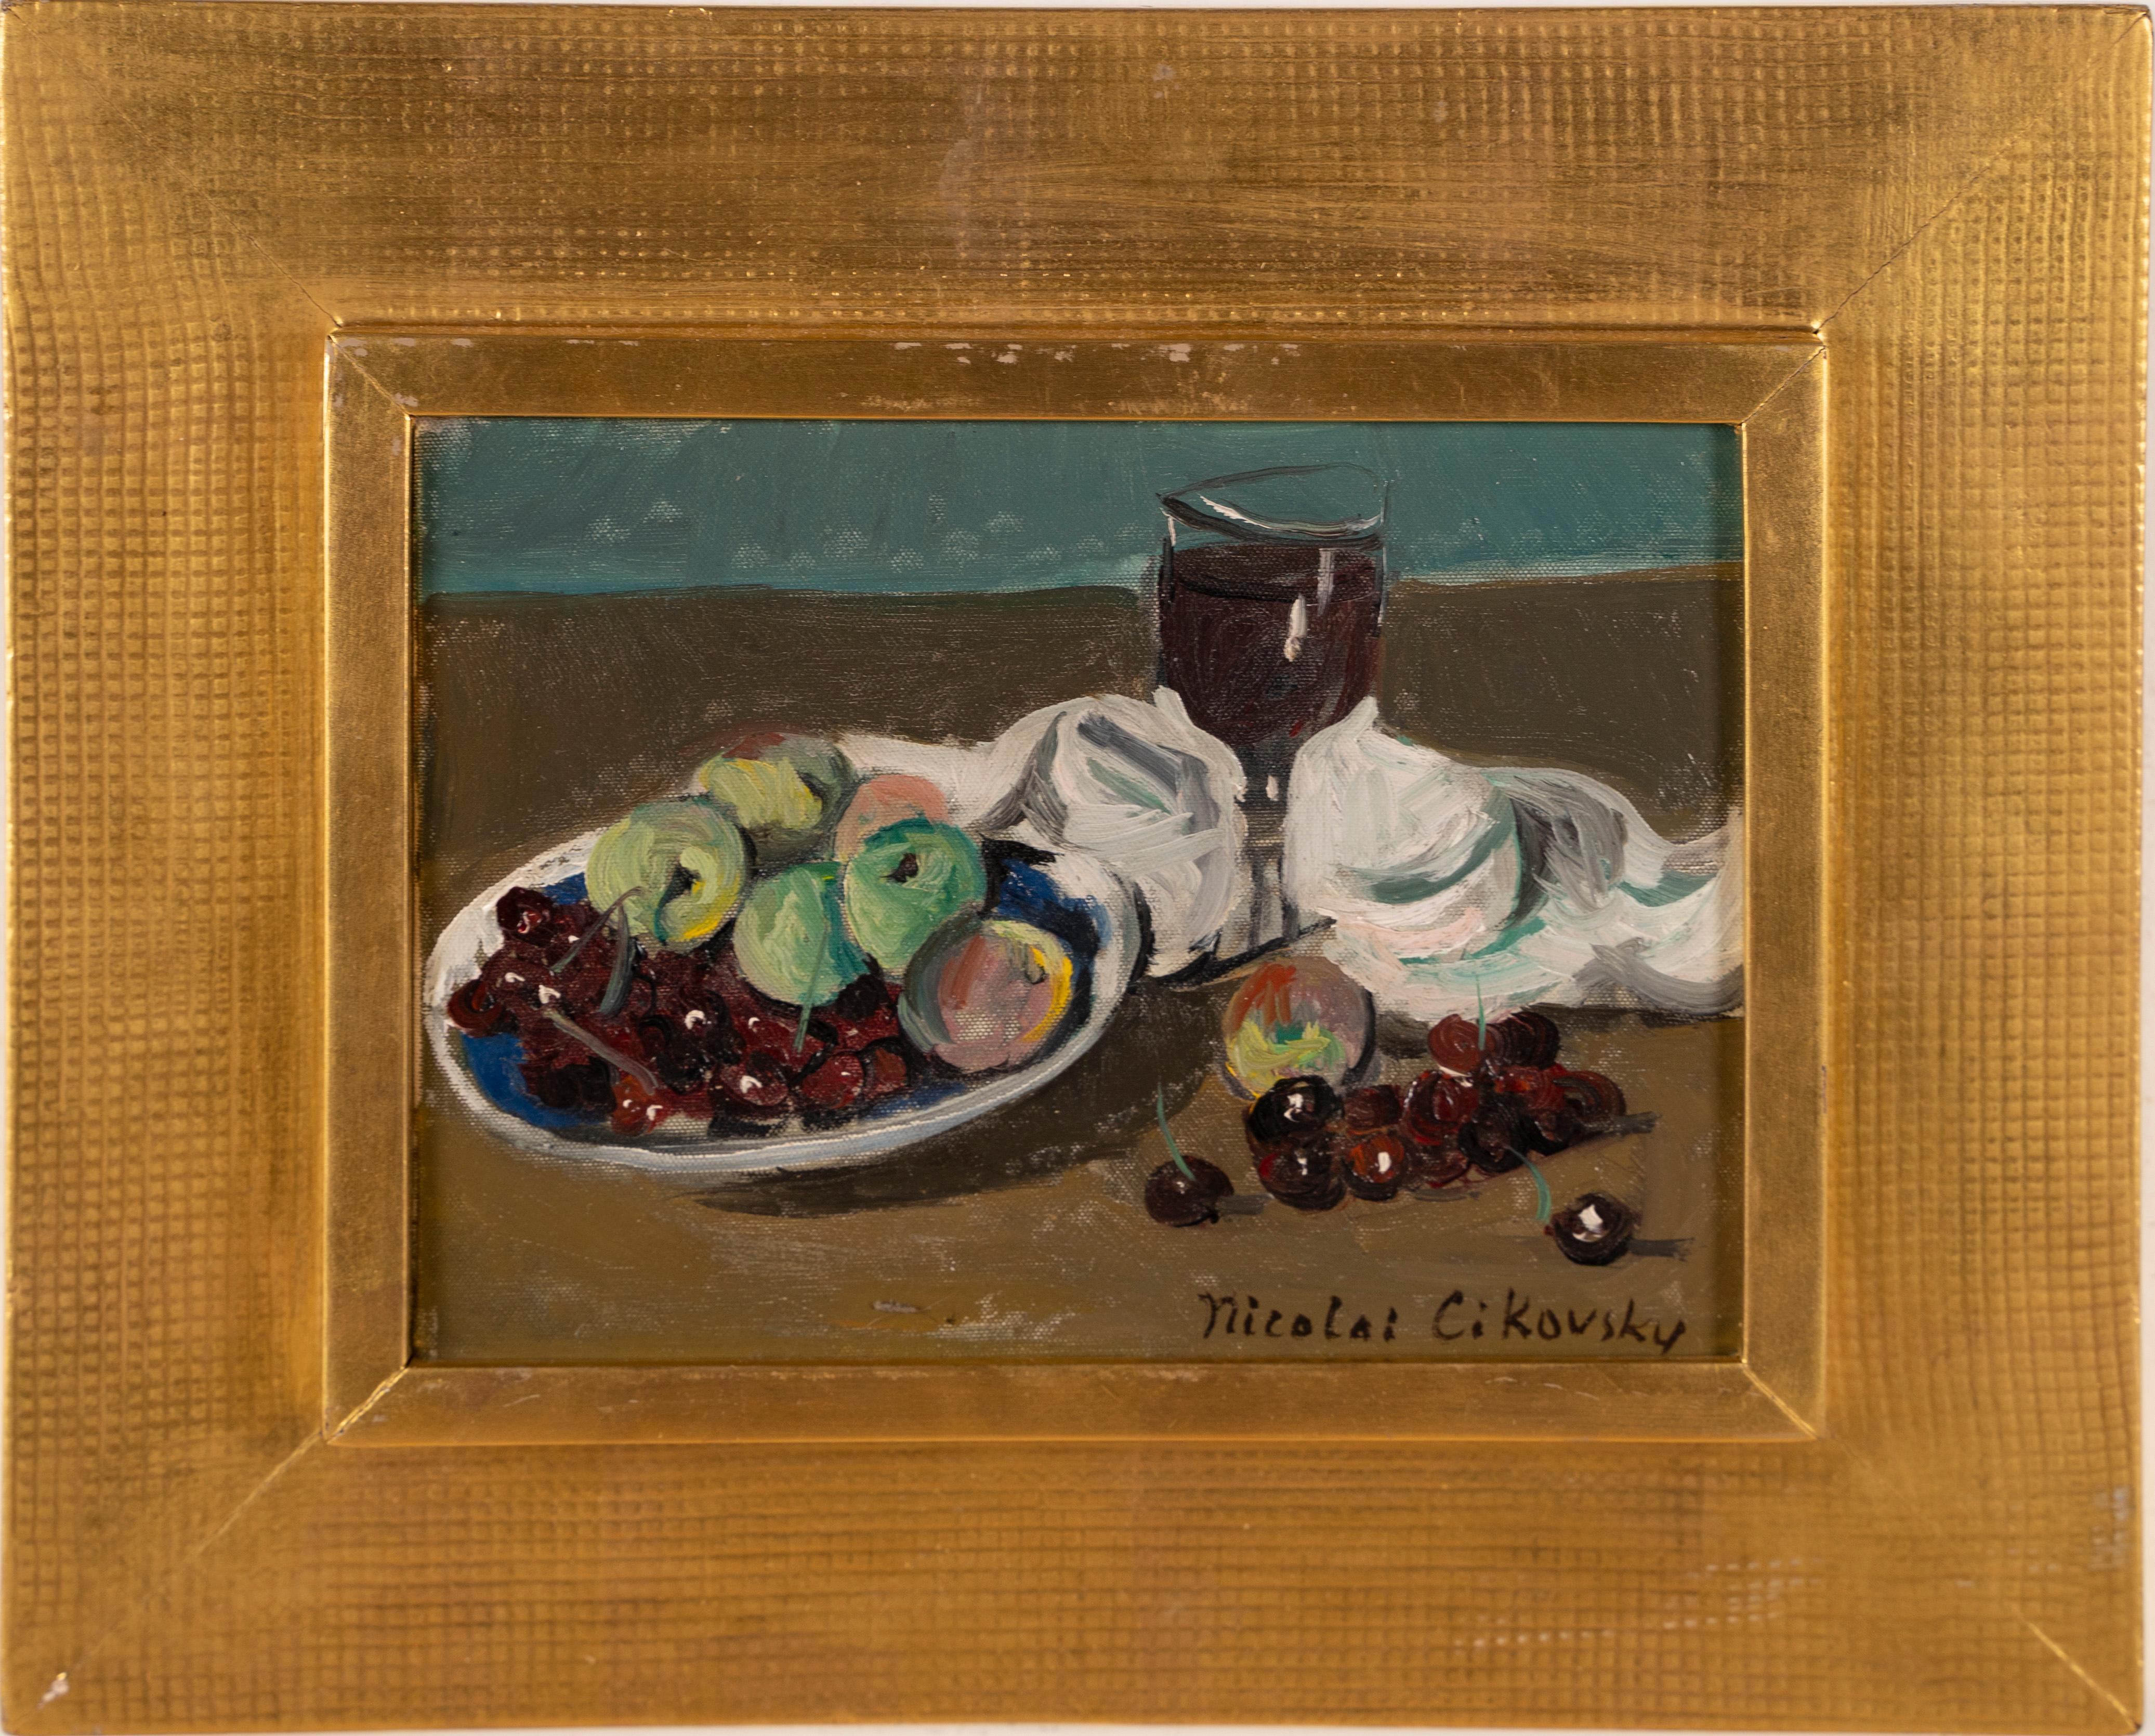 Antique American Modernist Framed Abstract Beach Fruit Still Life Oil Painting - Brown Still-Life Painting by Nicolai Cikovsky